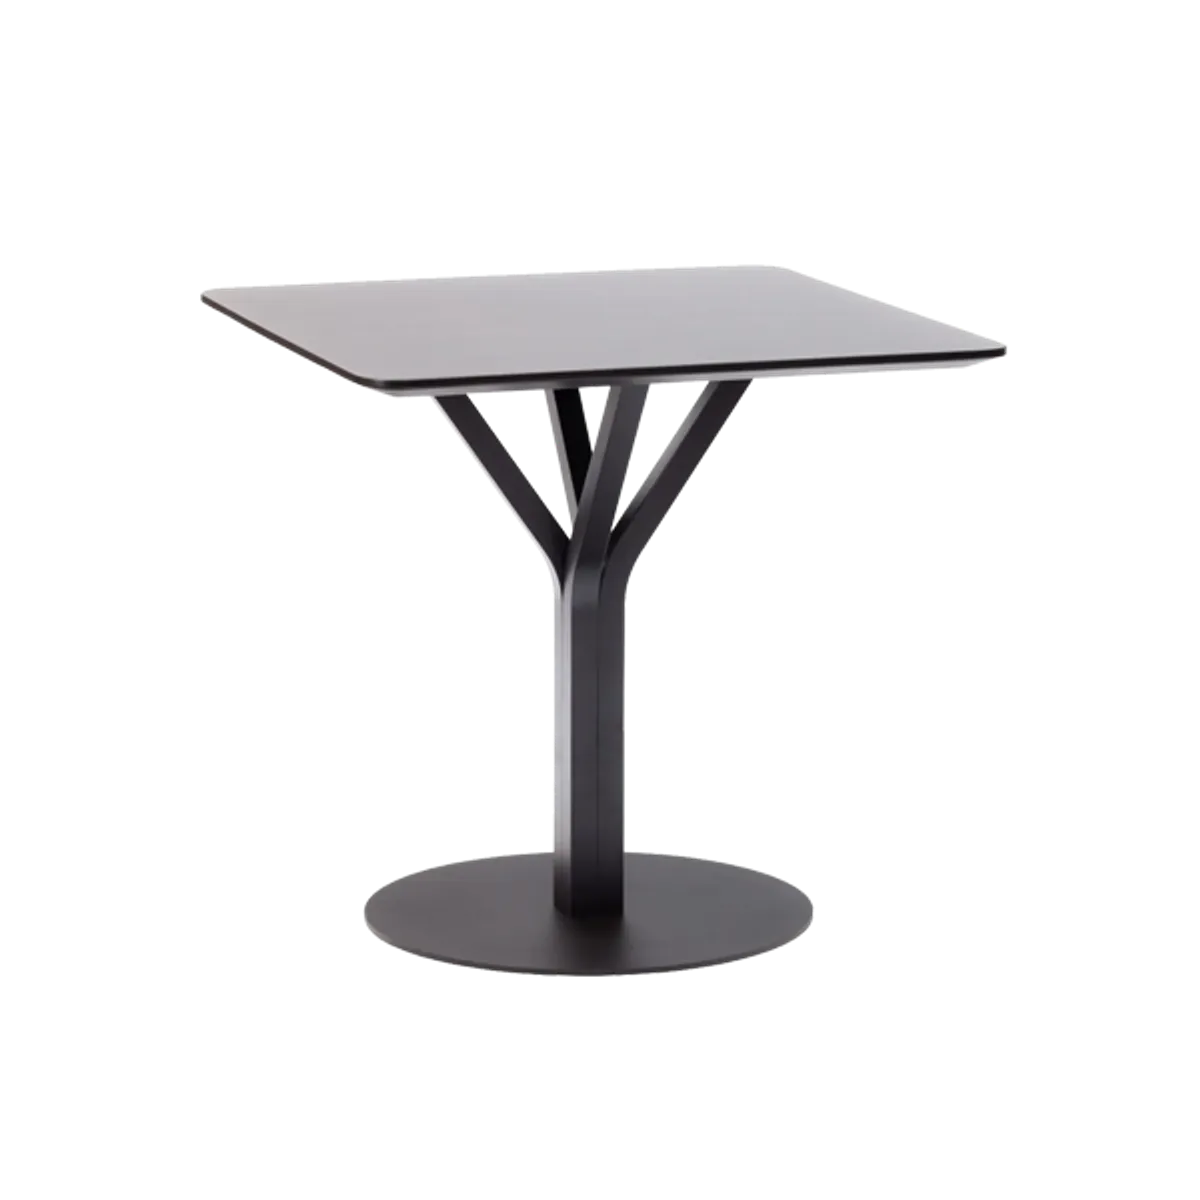 Albero square table Inside Out Contracts